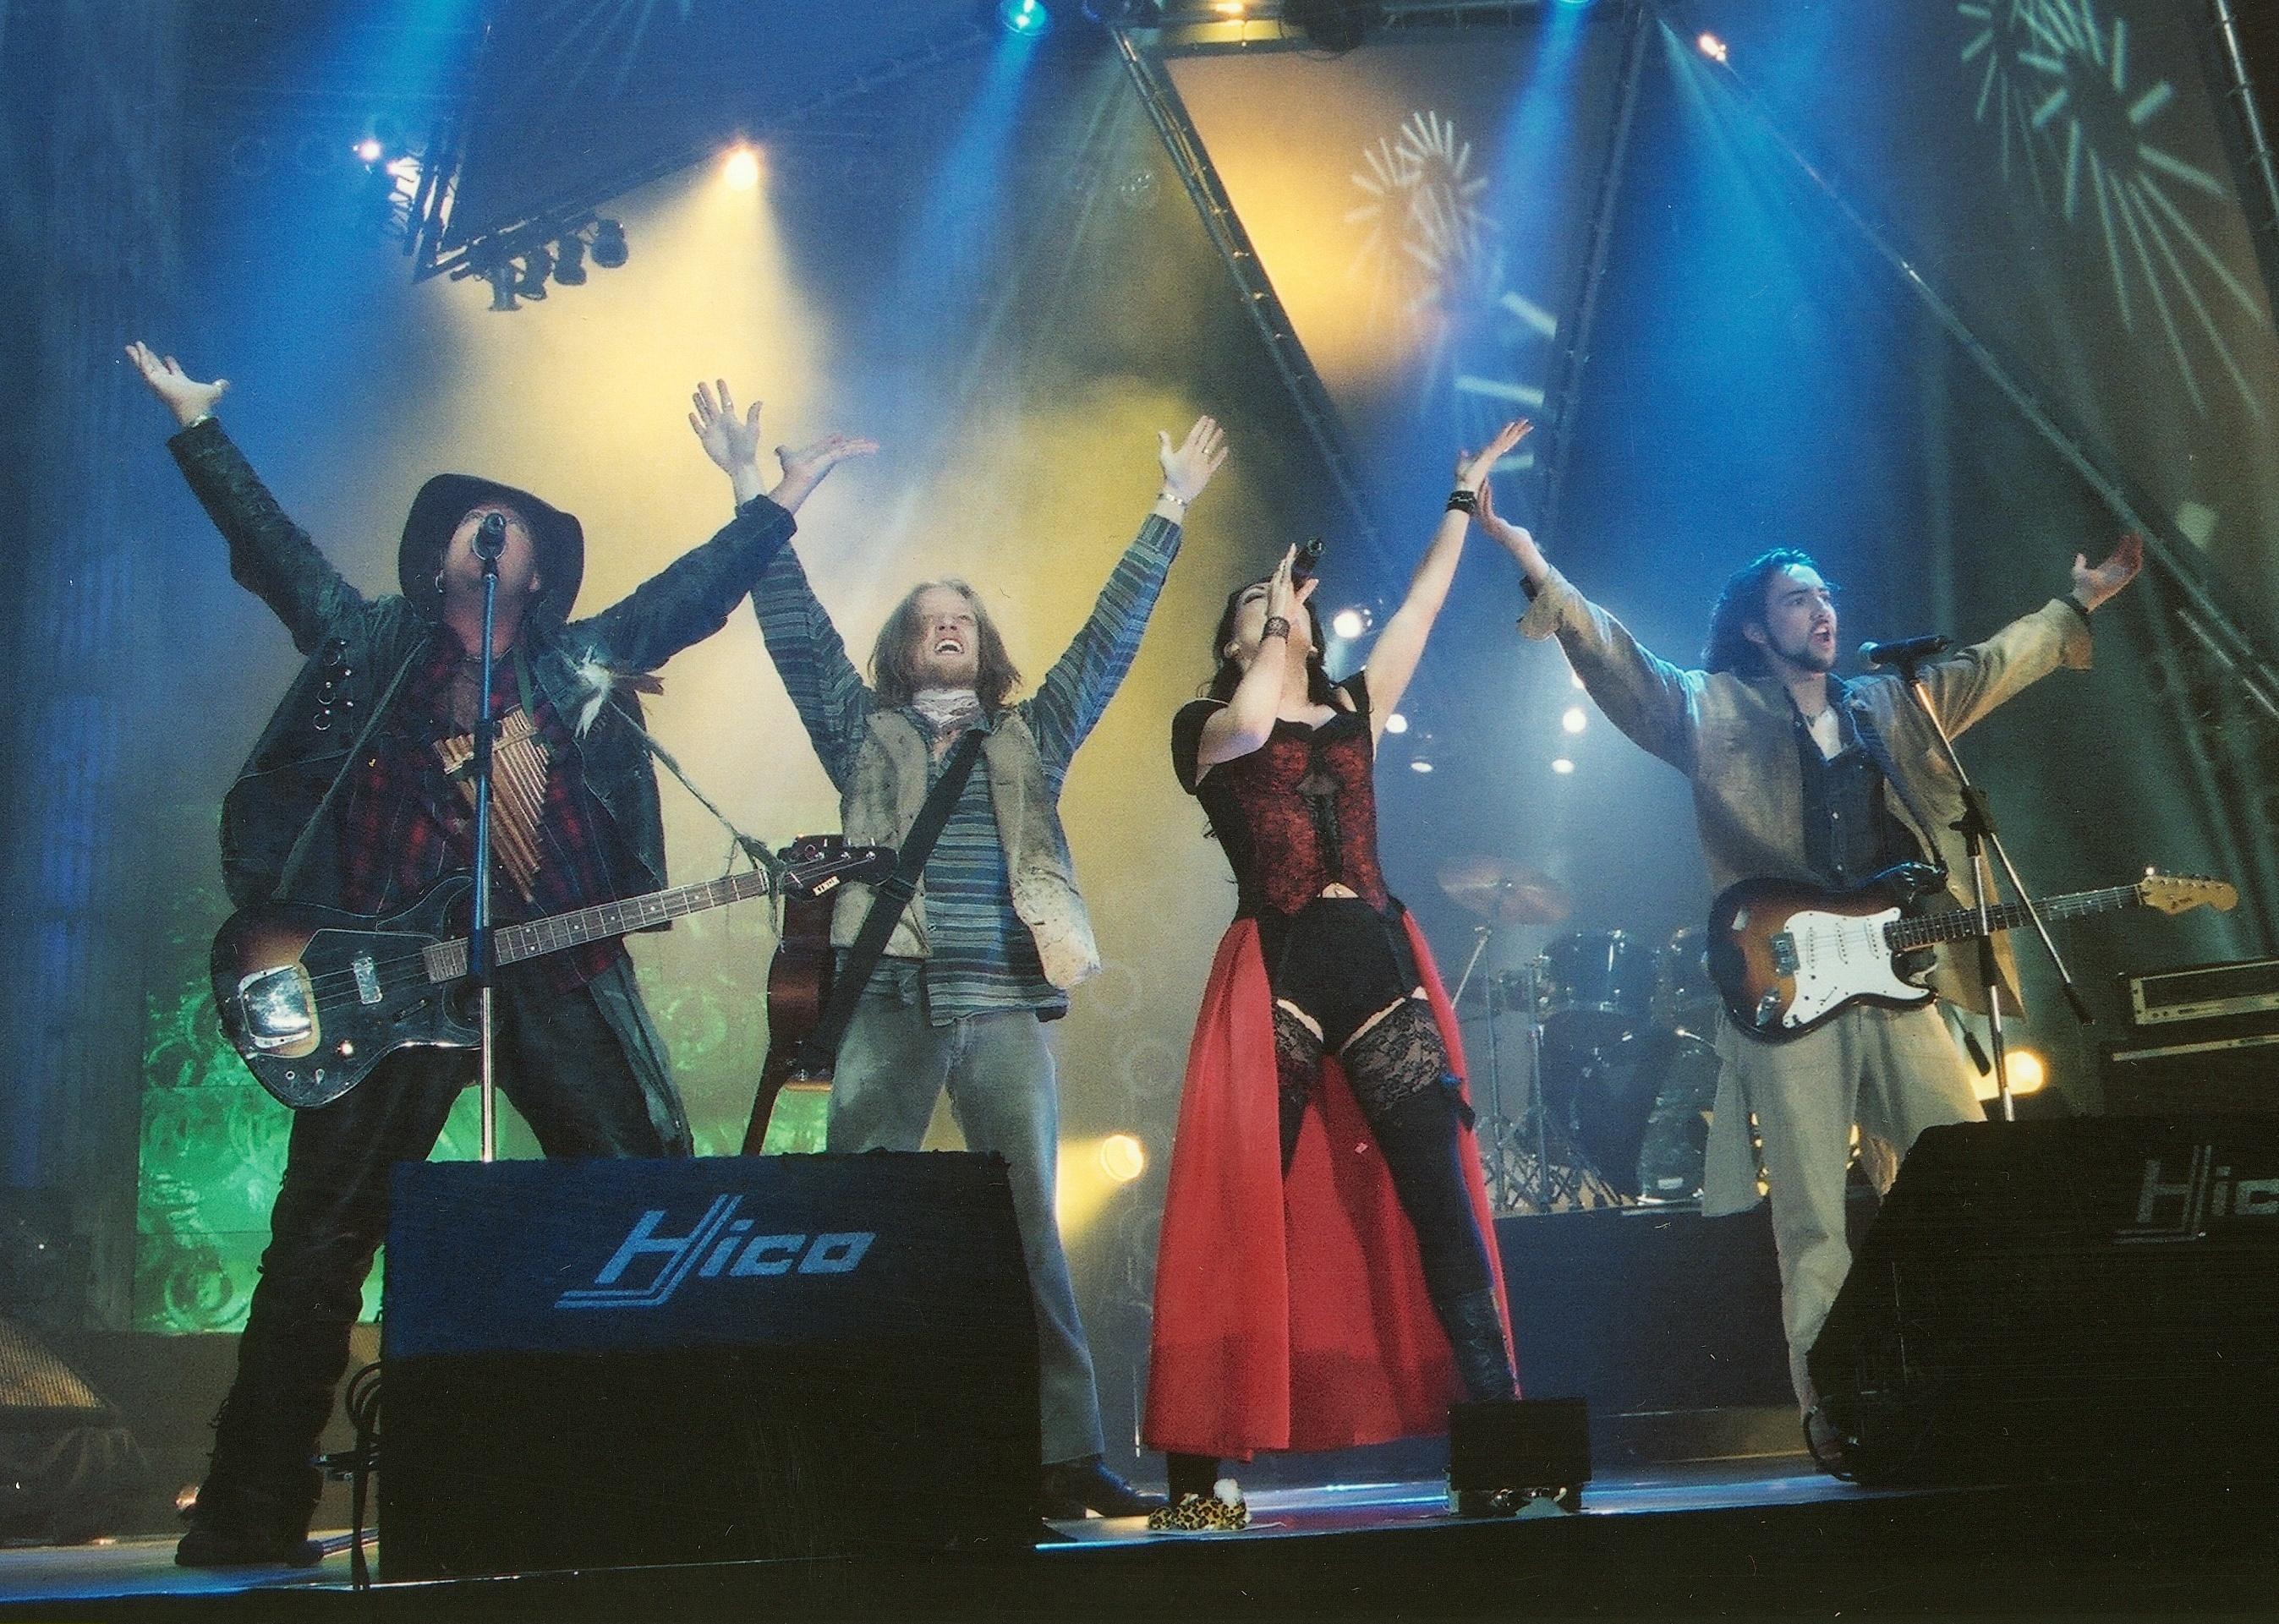 Rednex band performing on stage.